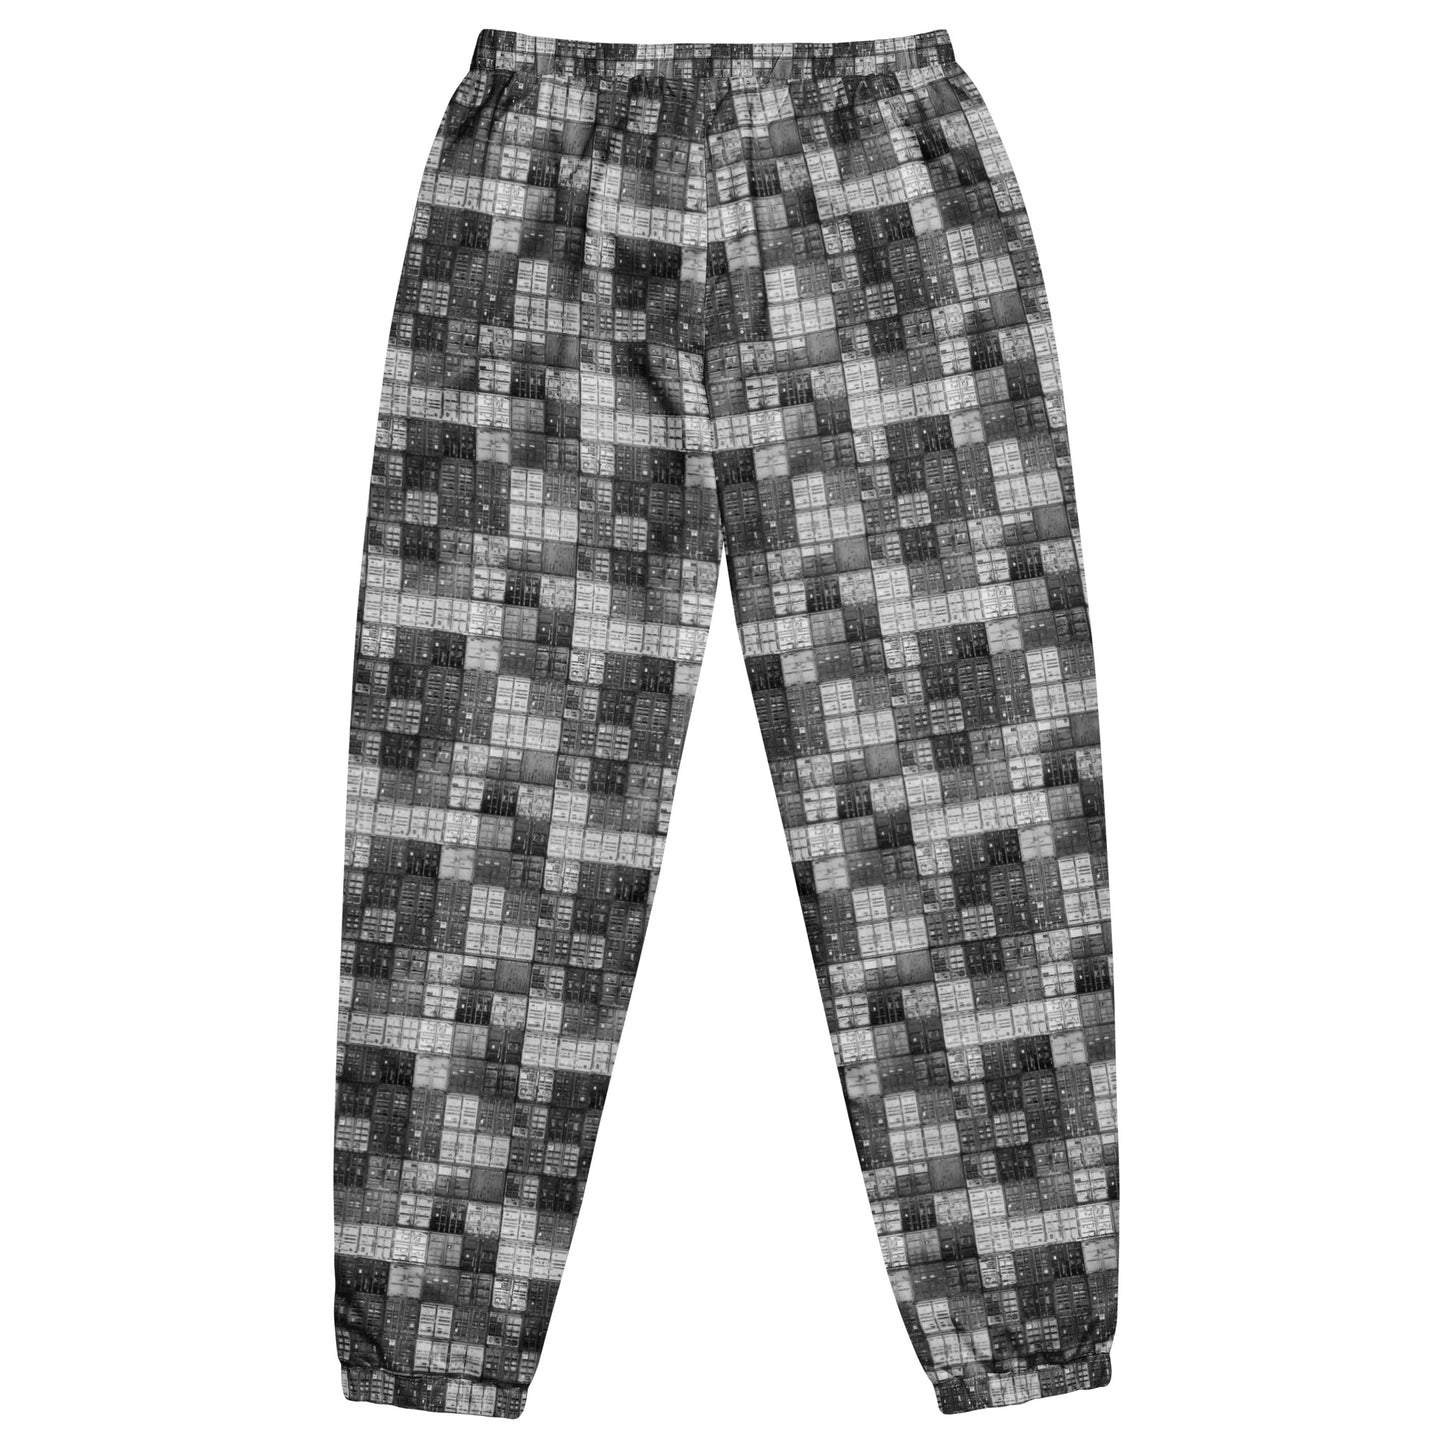 "Mono Shipping Containers" Unisex Track Pants